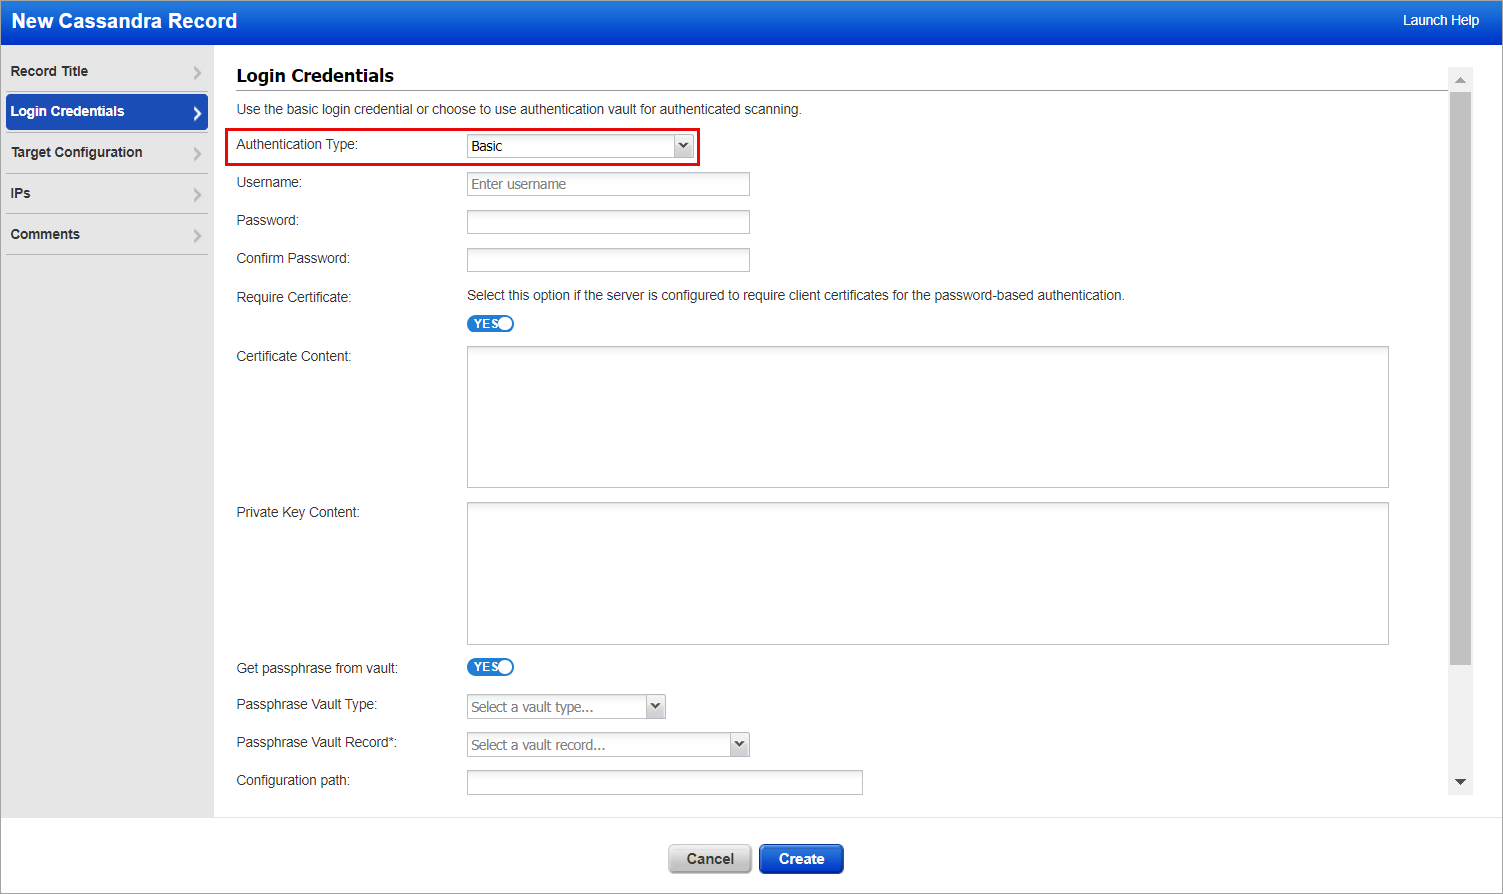 Login credentials tab with the Authentication Types selected as Basic